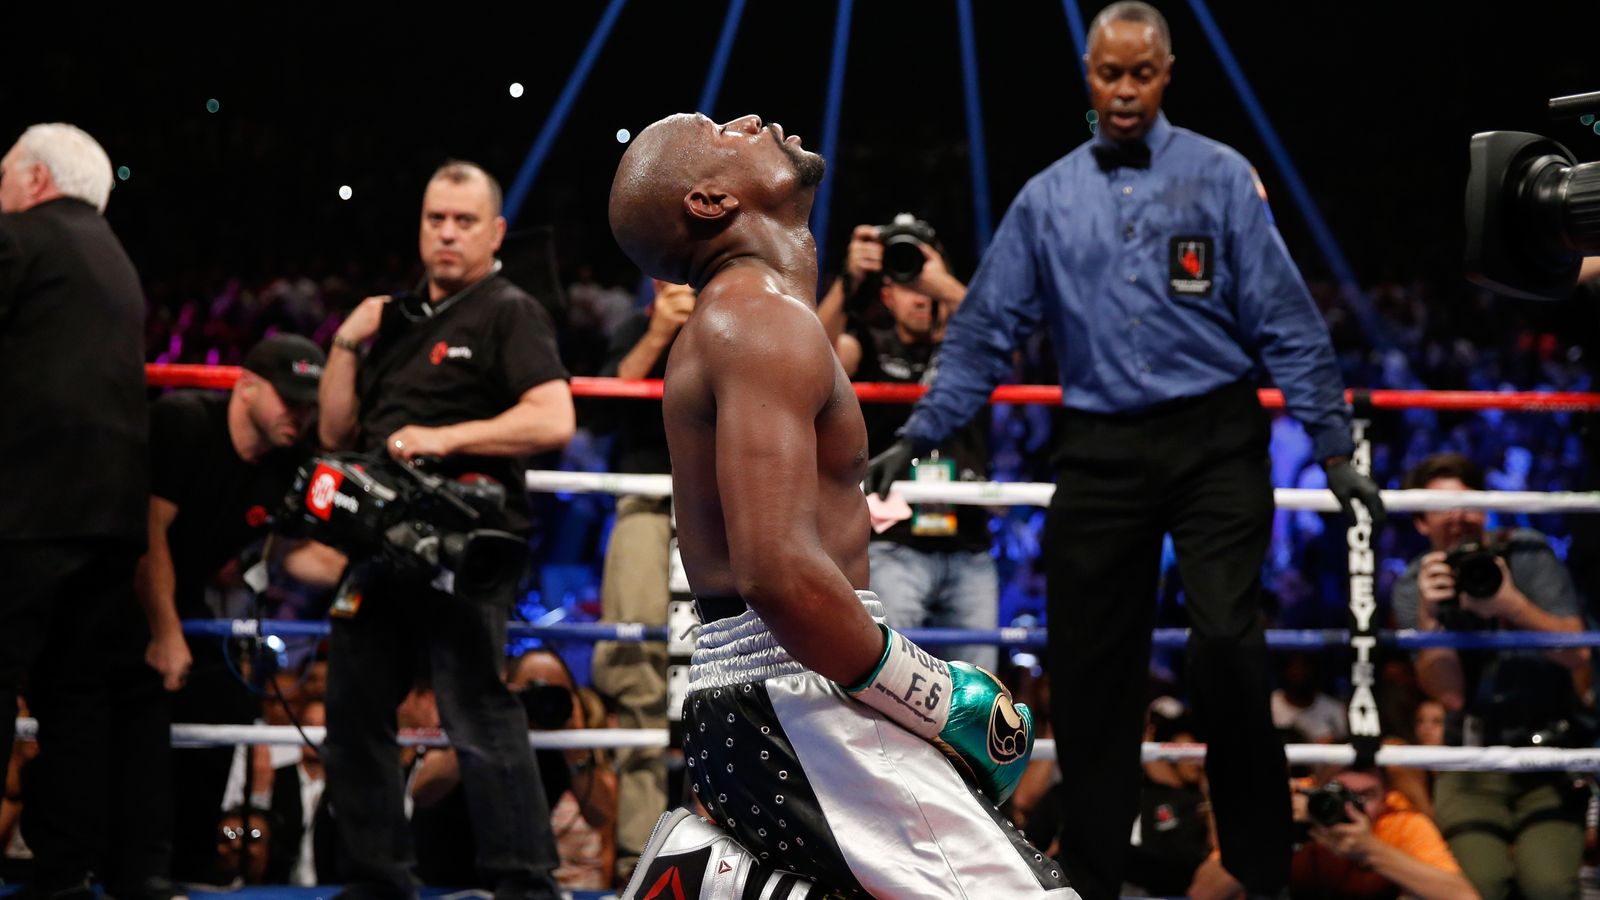 Floyd Mayweather retired with unbeaten boxing record but win over